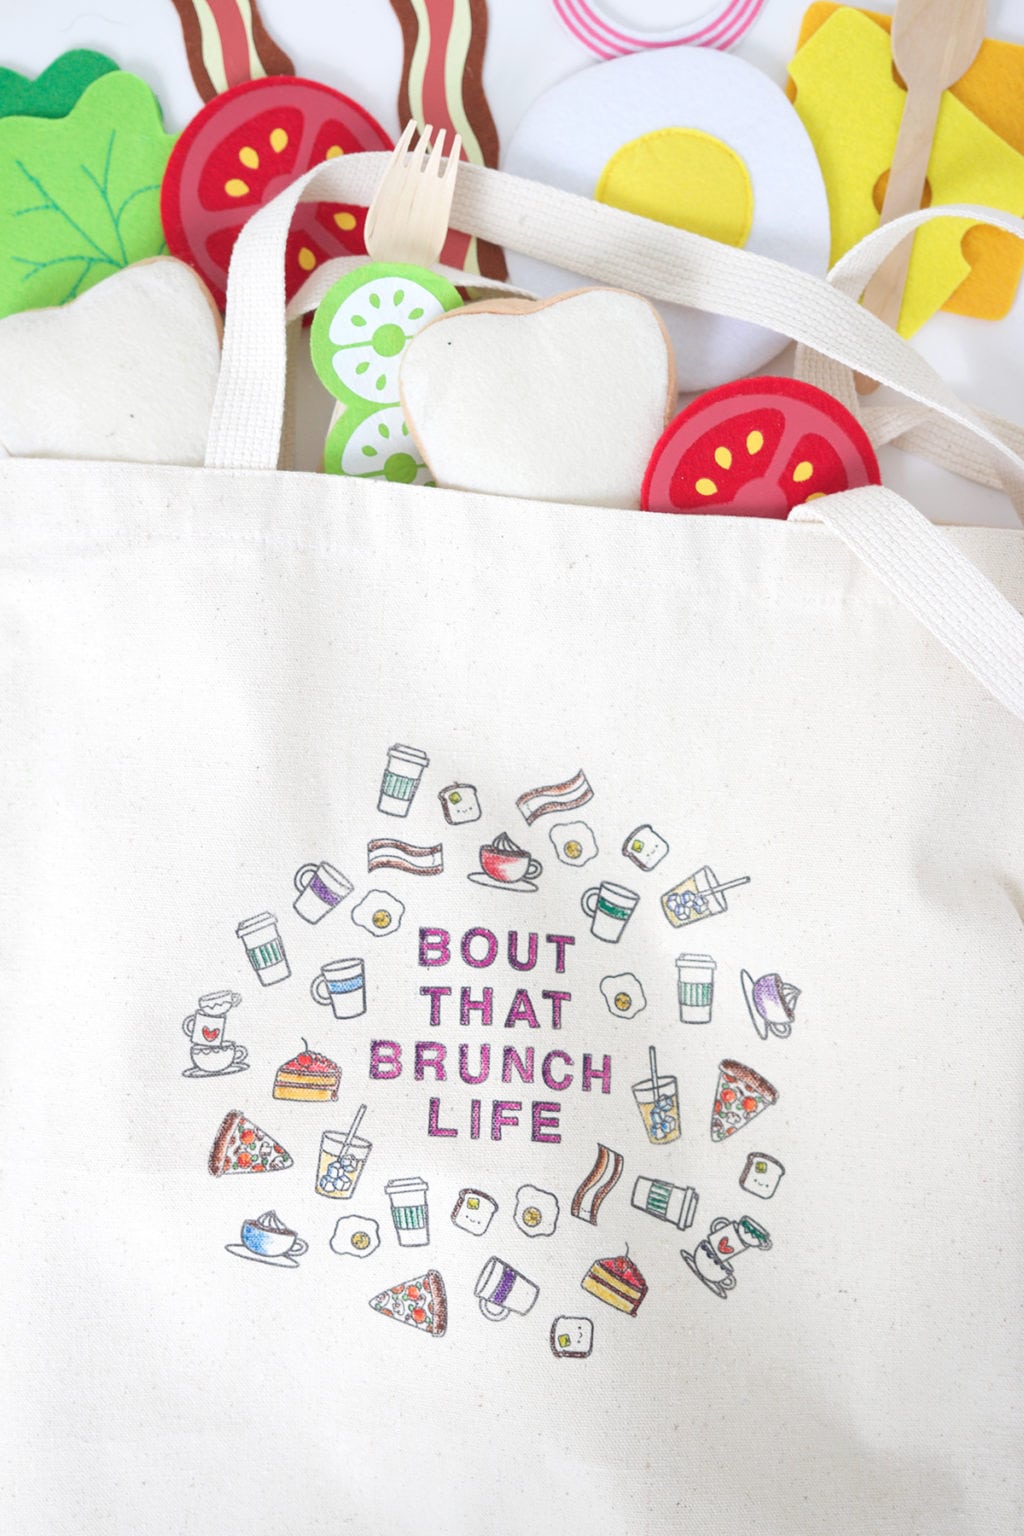 Use a few supplies to create a customized easy stamped canvas tote bag that you can color with fabric markers